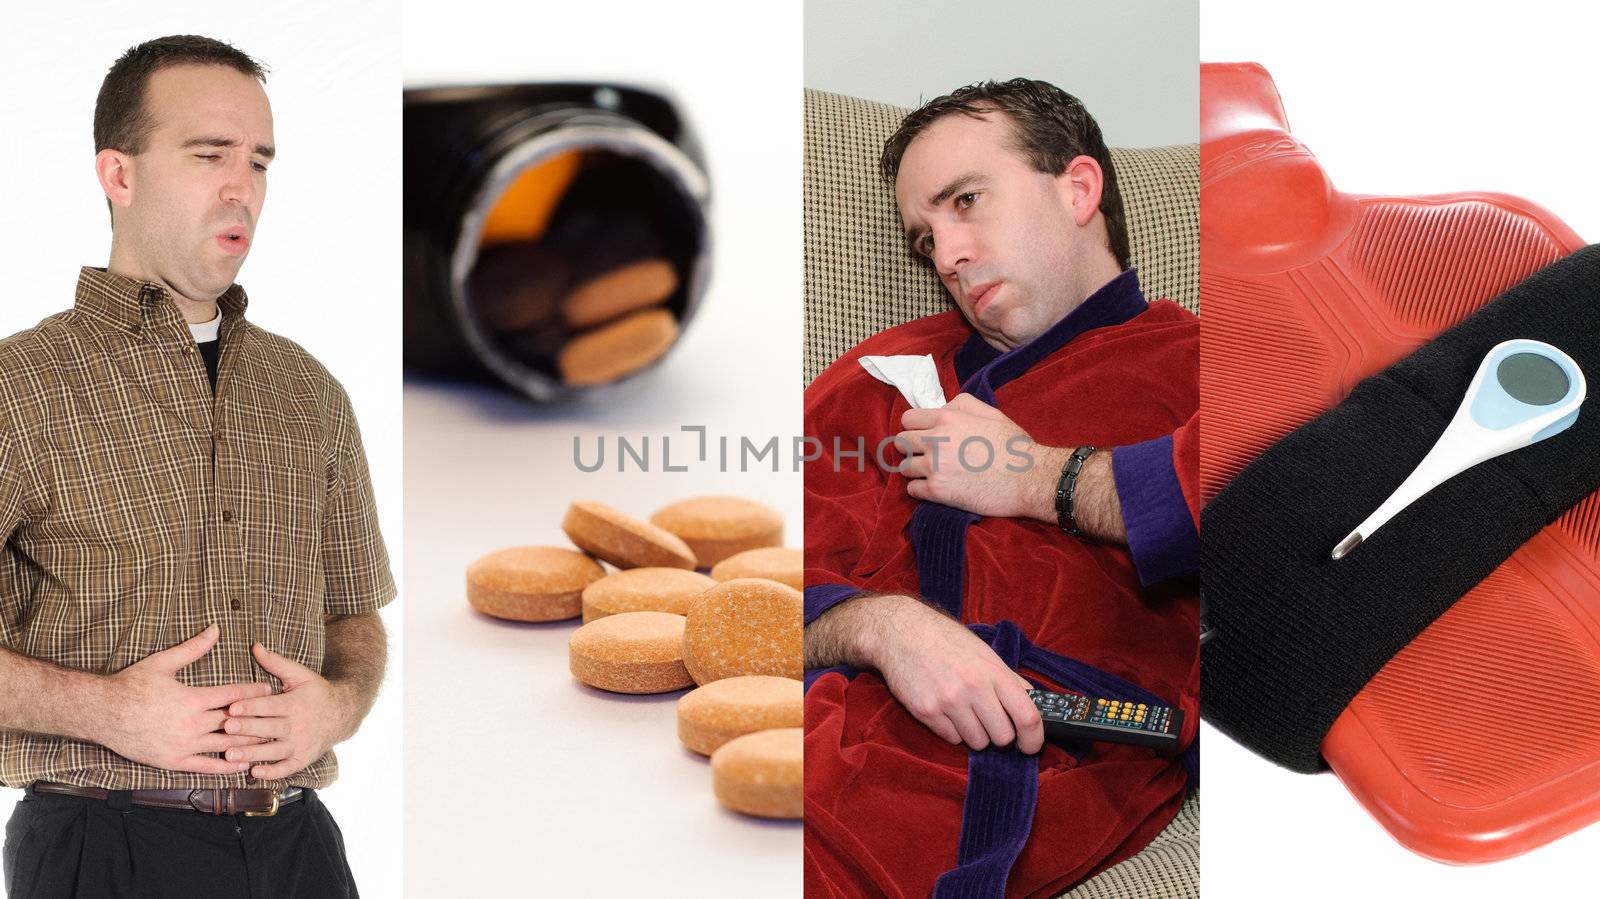 A collage featuring images associated with having the flu.